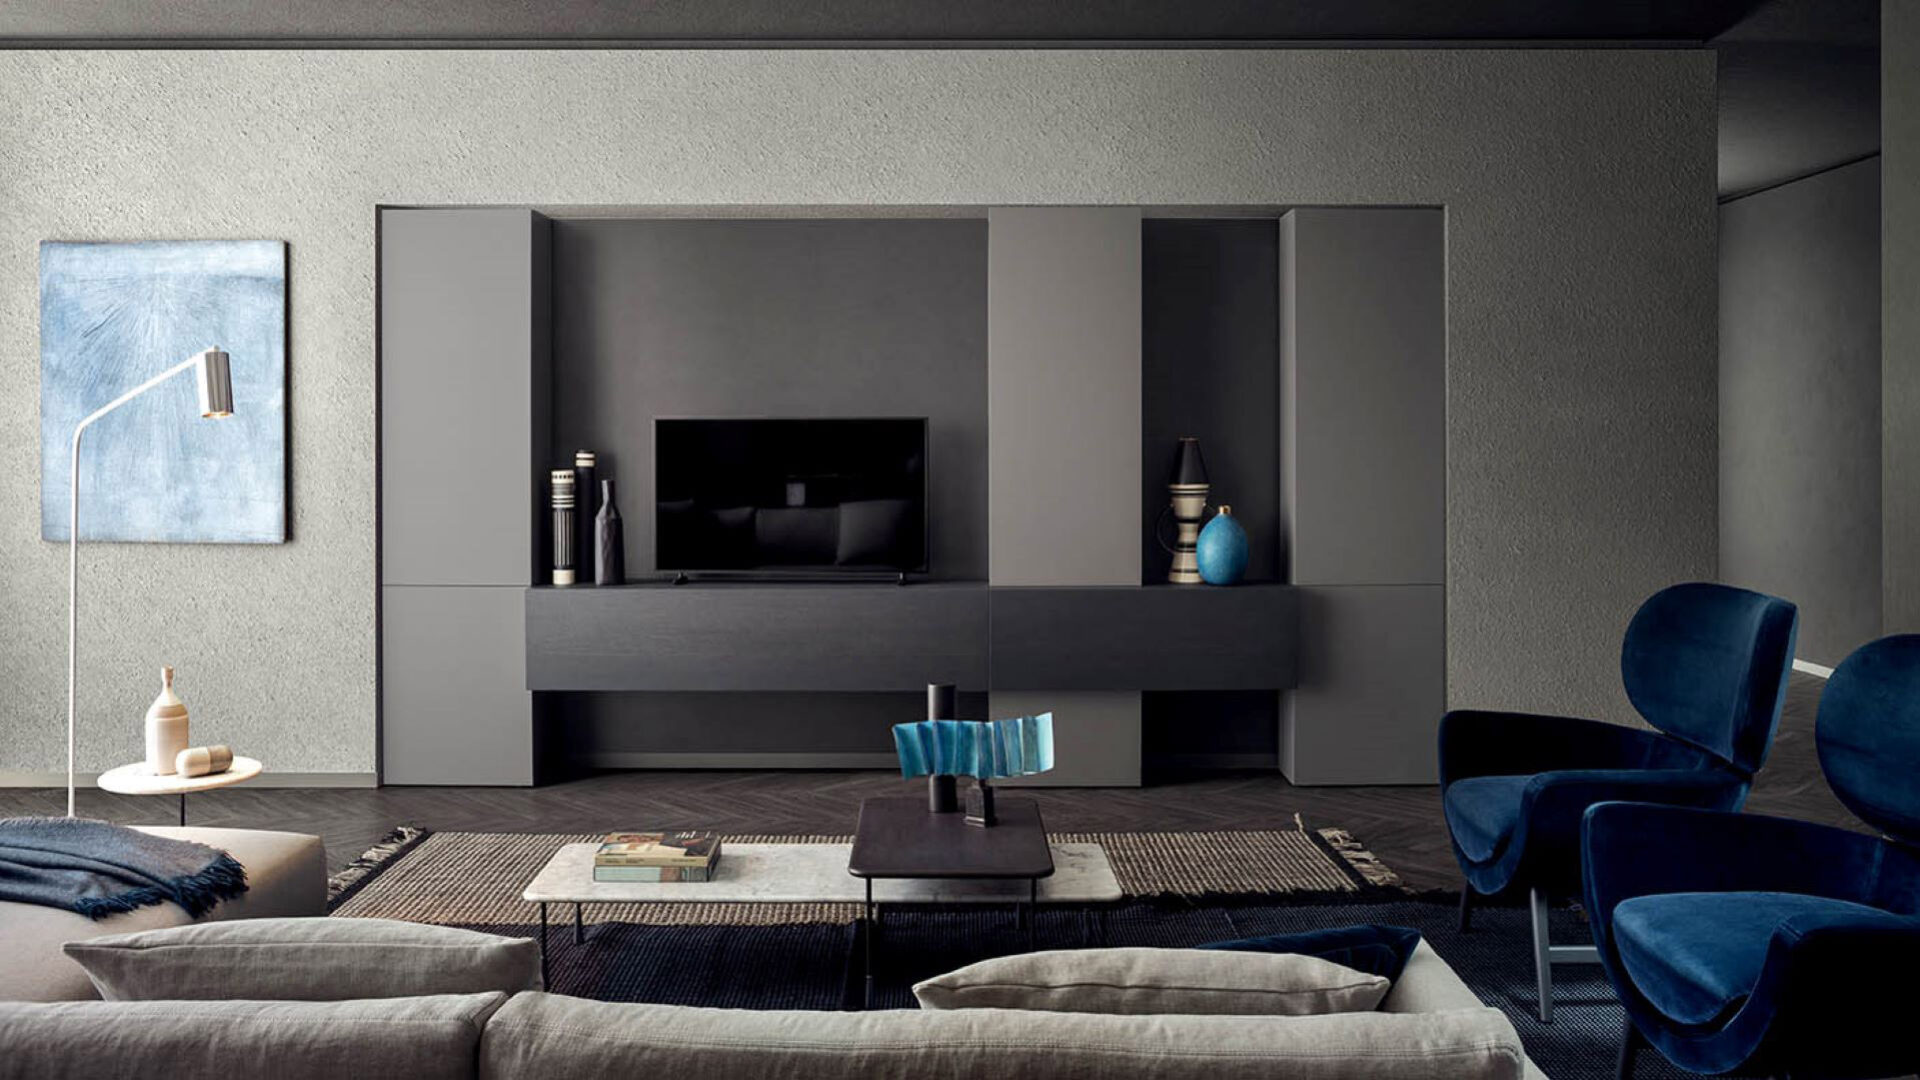 Two Tone slate grey and wenge wood colour fitted modern tv wall cabinet